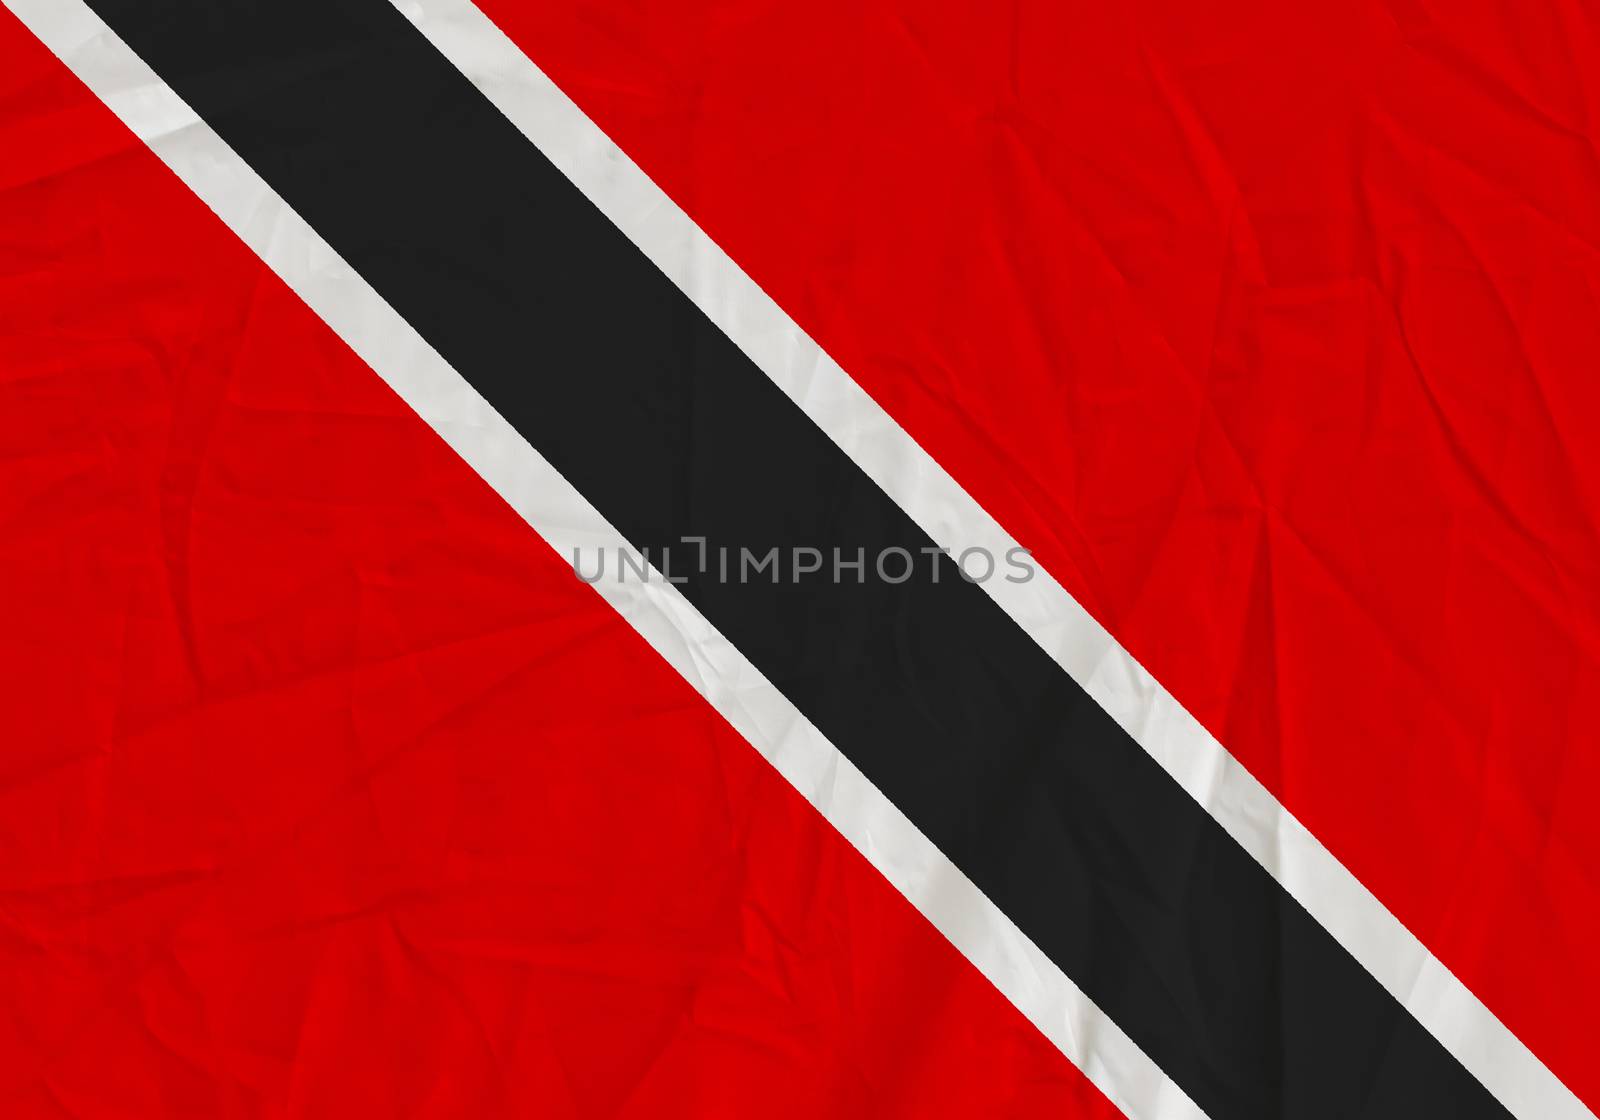 Trinidad and Tobago grunge flag by Visual-Content